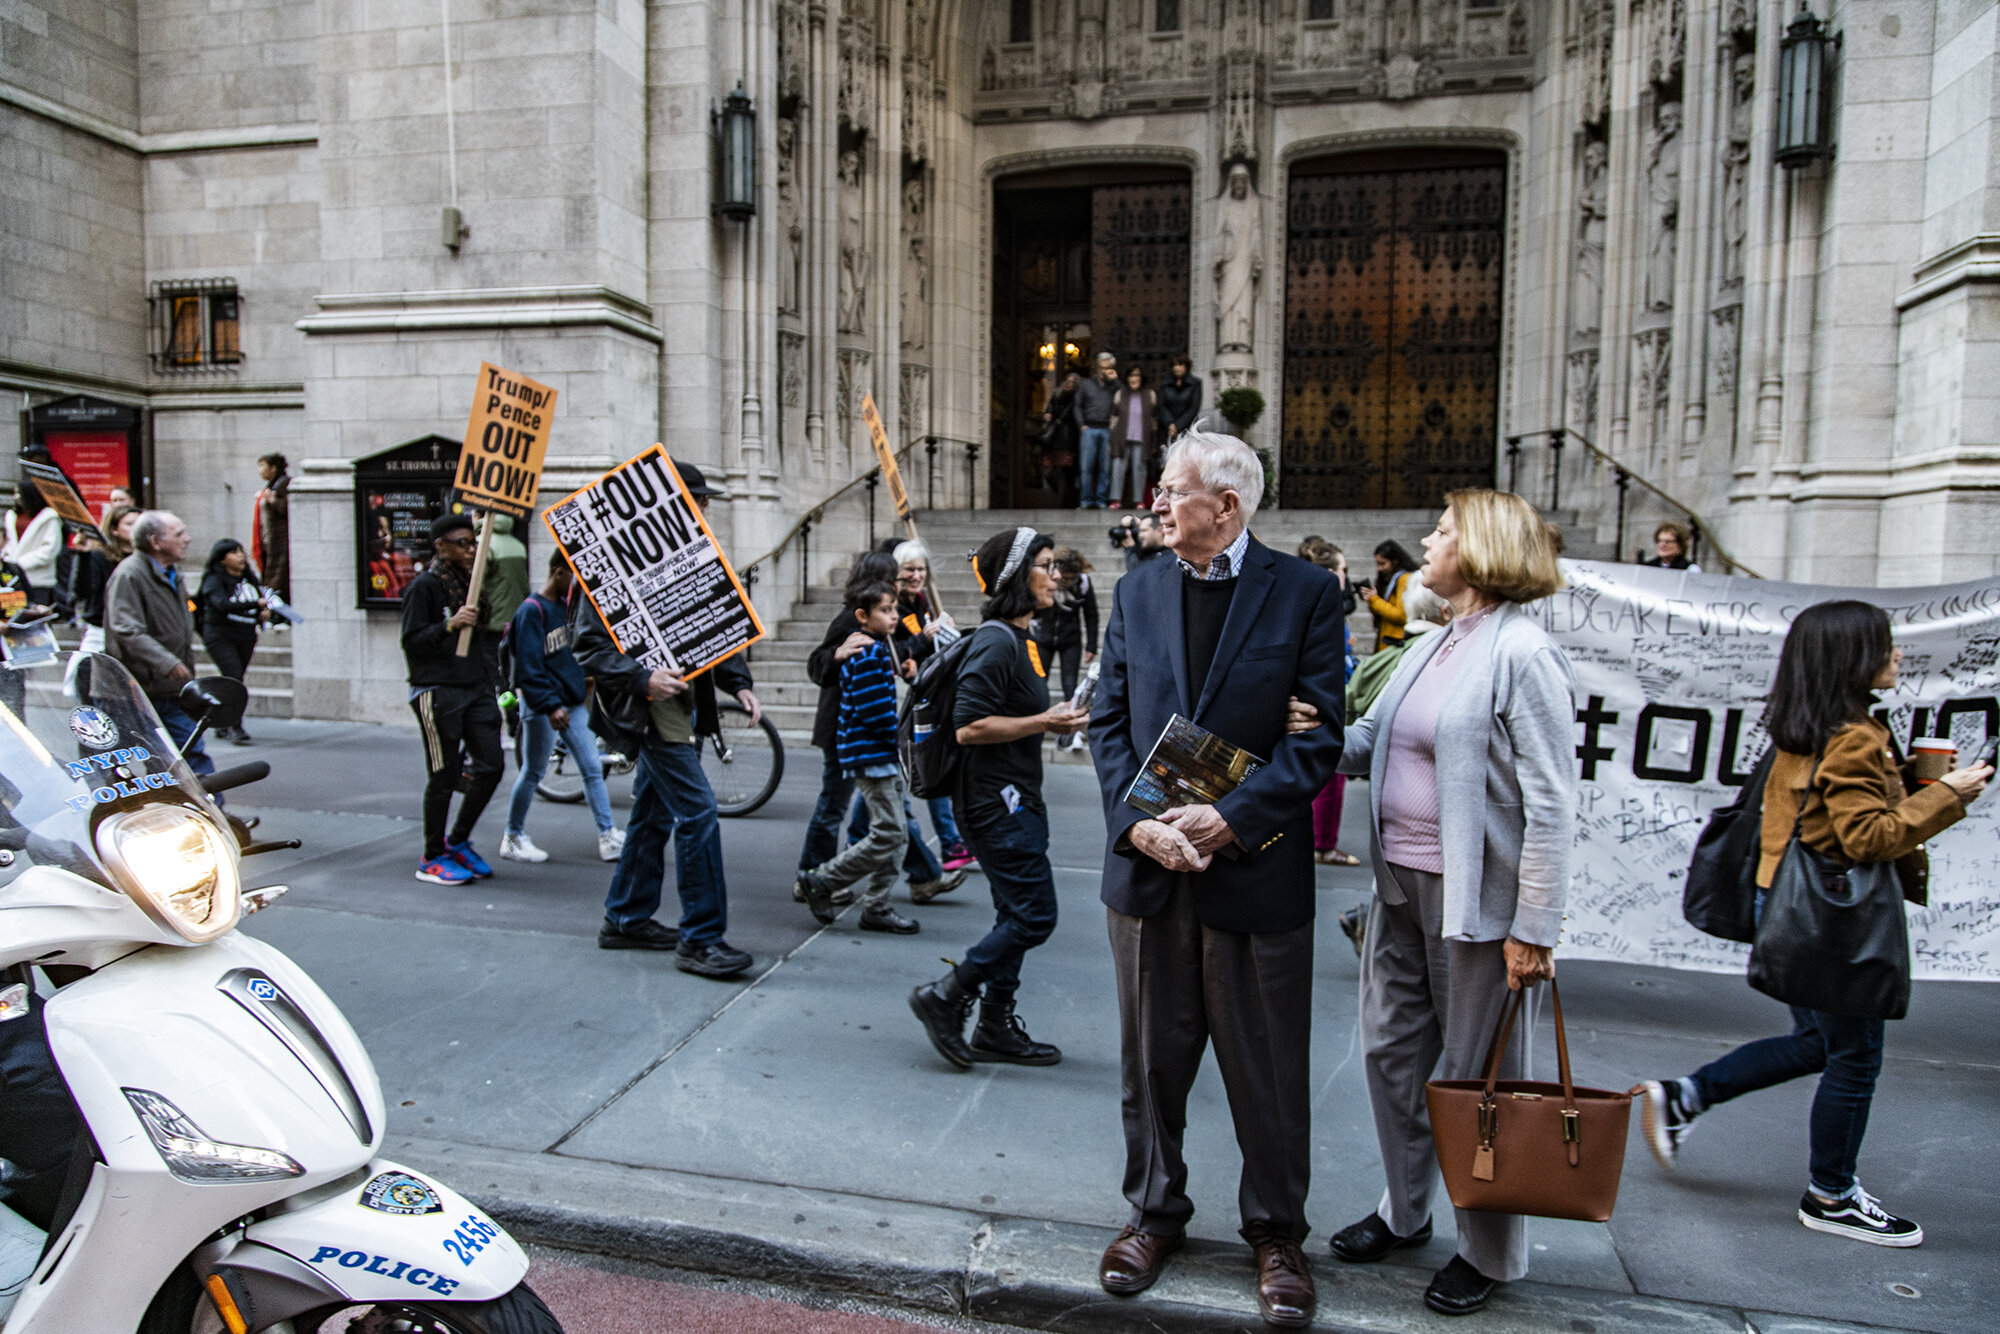 OUTNOW_Protest_2019_NYC-2554.jpg